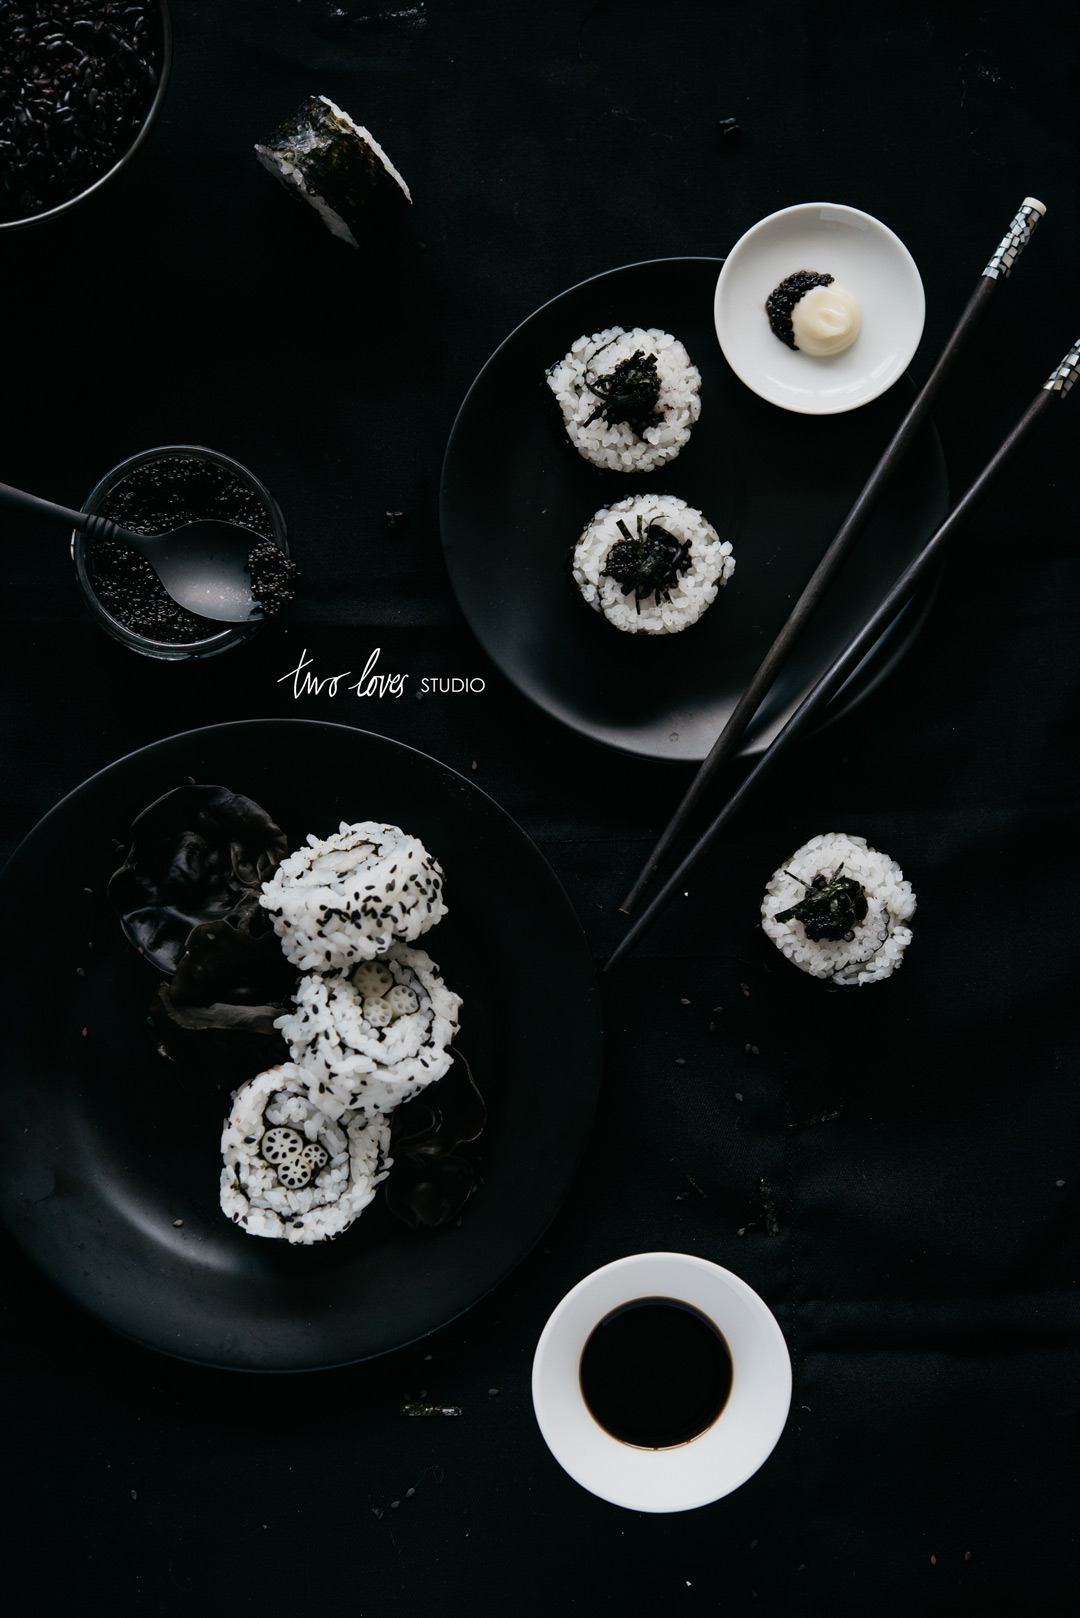 Two Loves Studio Black White Food Photography Sushi